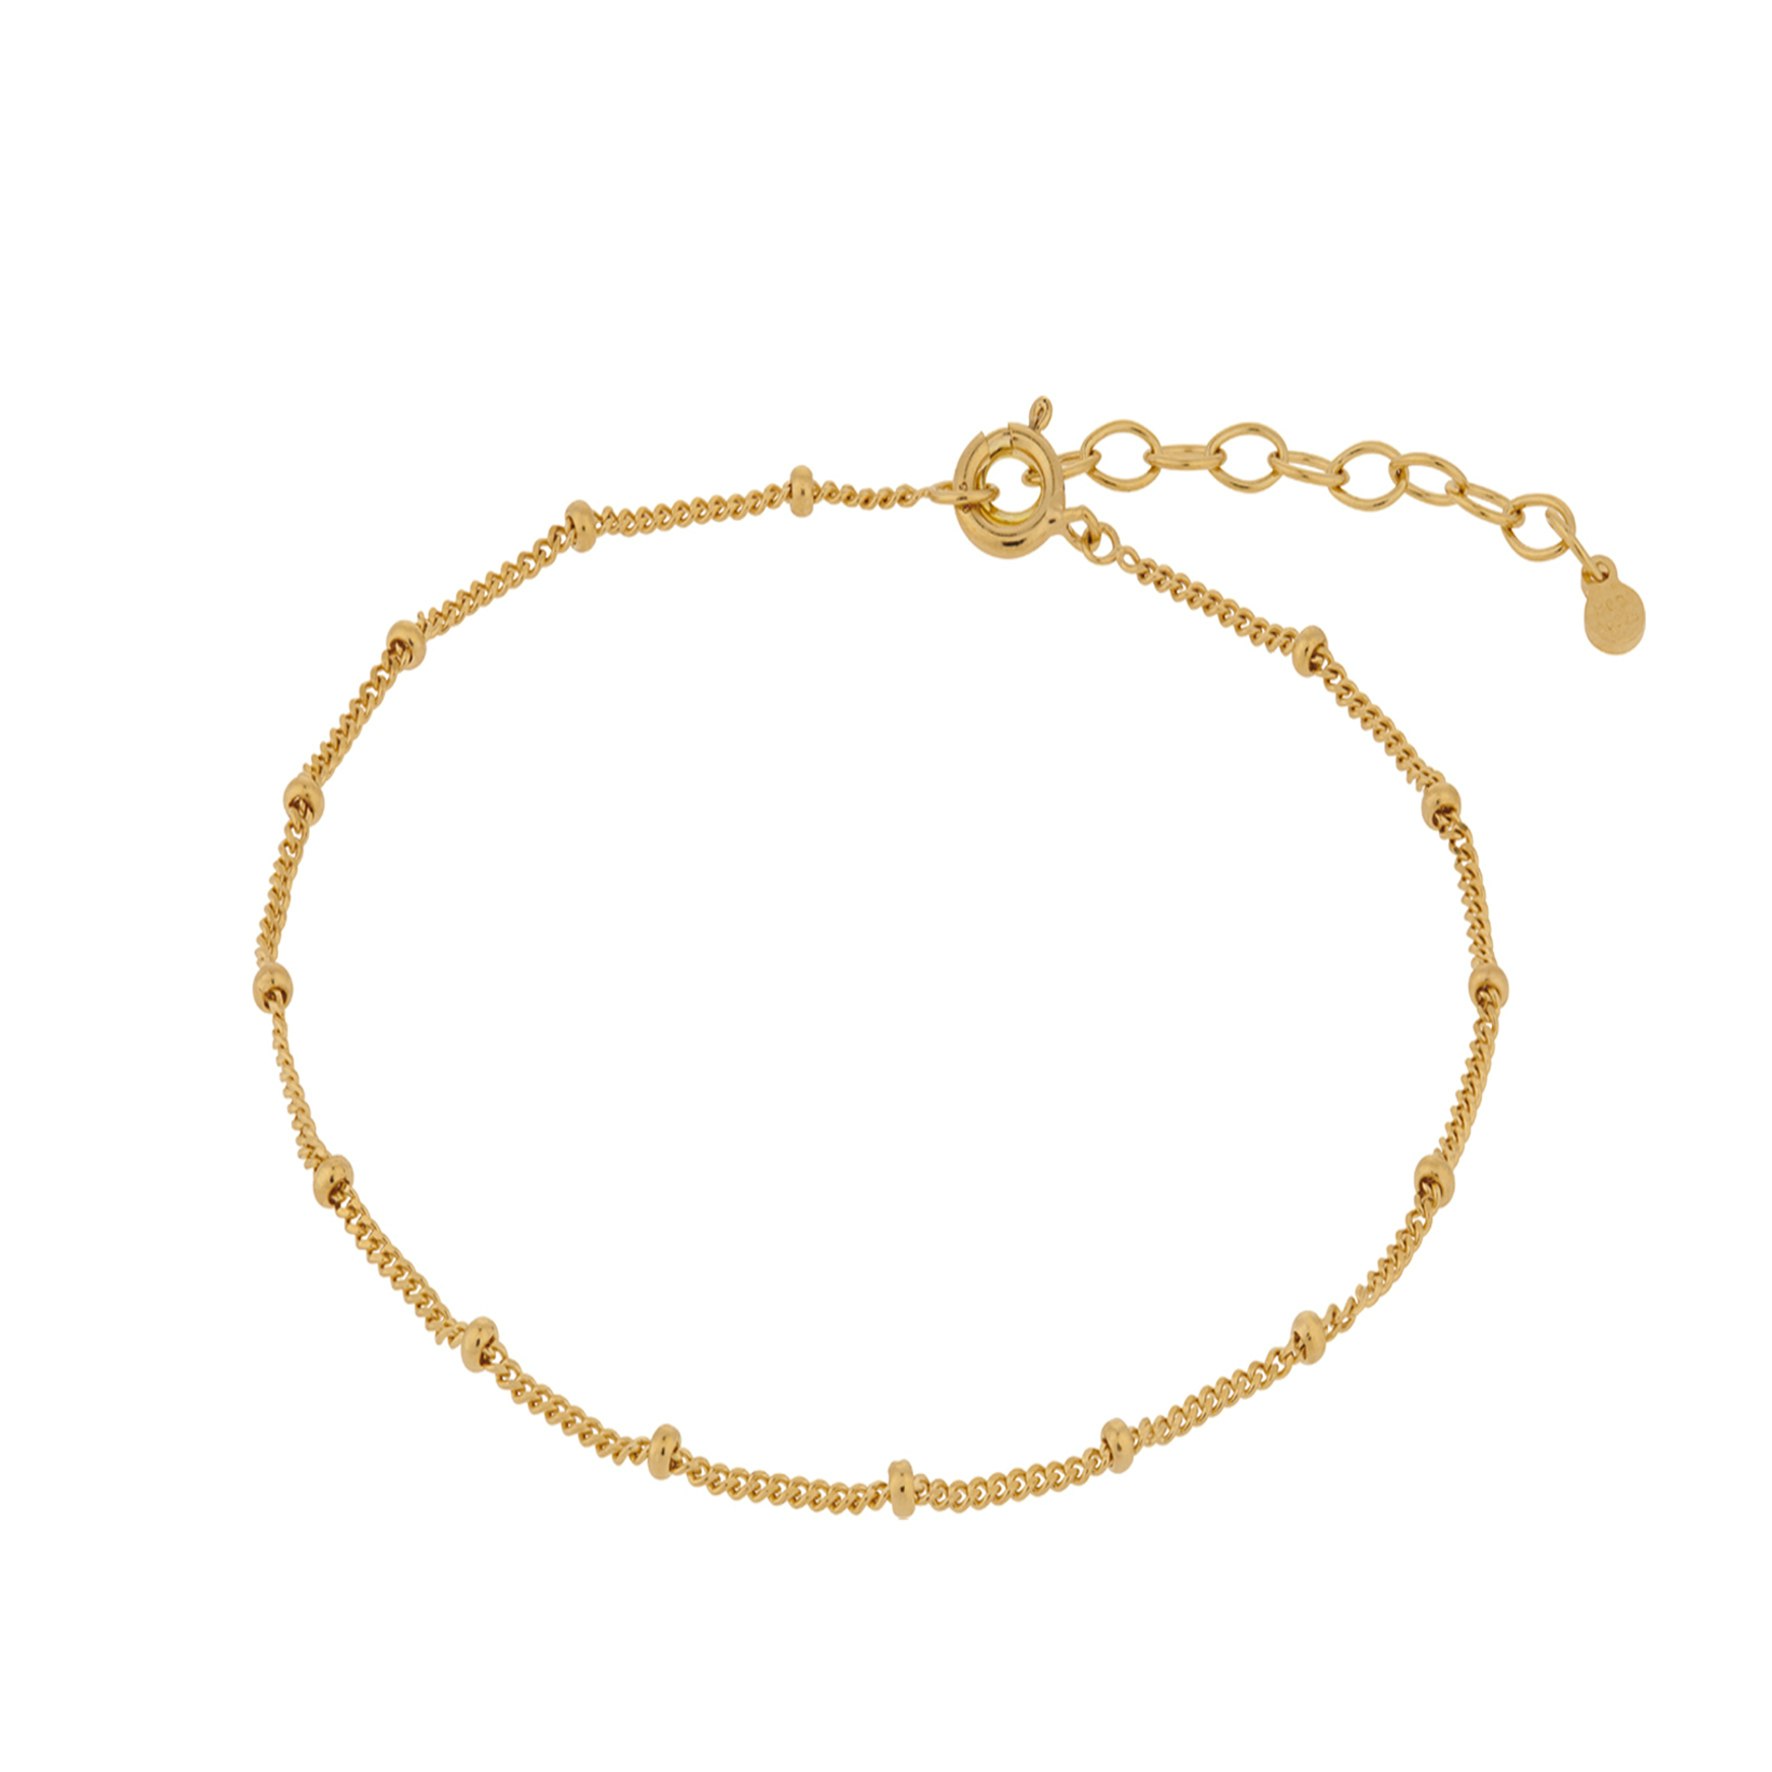 Solar Anklet from Pernille Corydon in Goldplated Silver Sterling 925